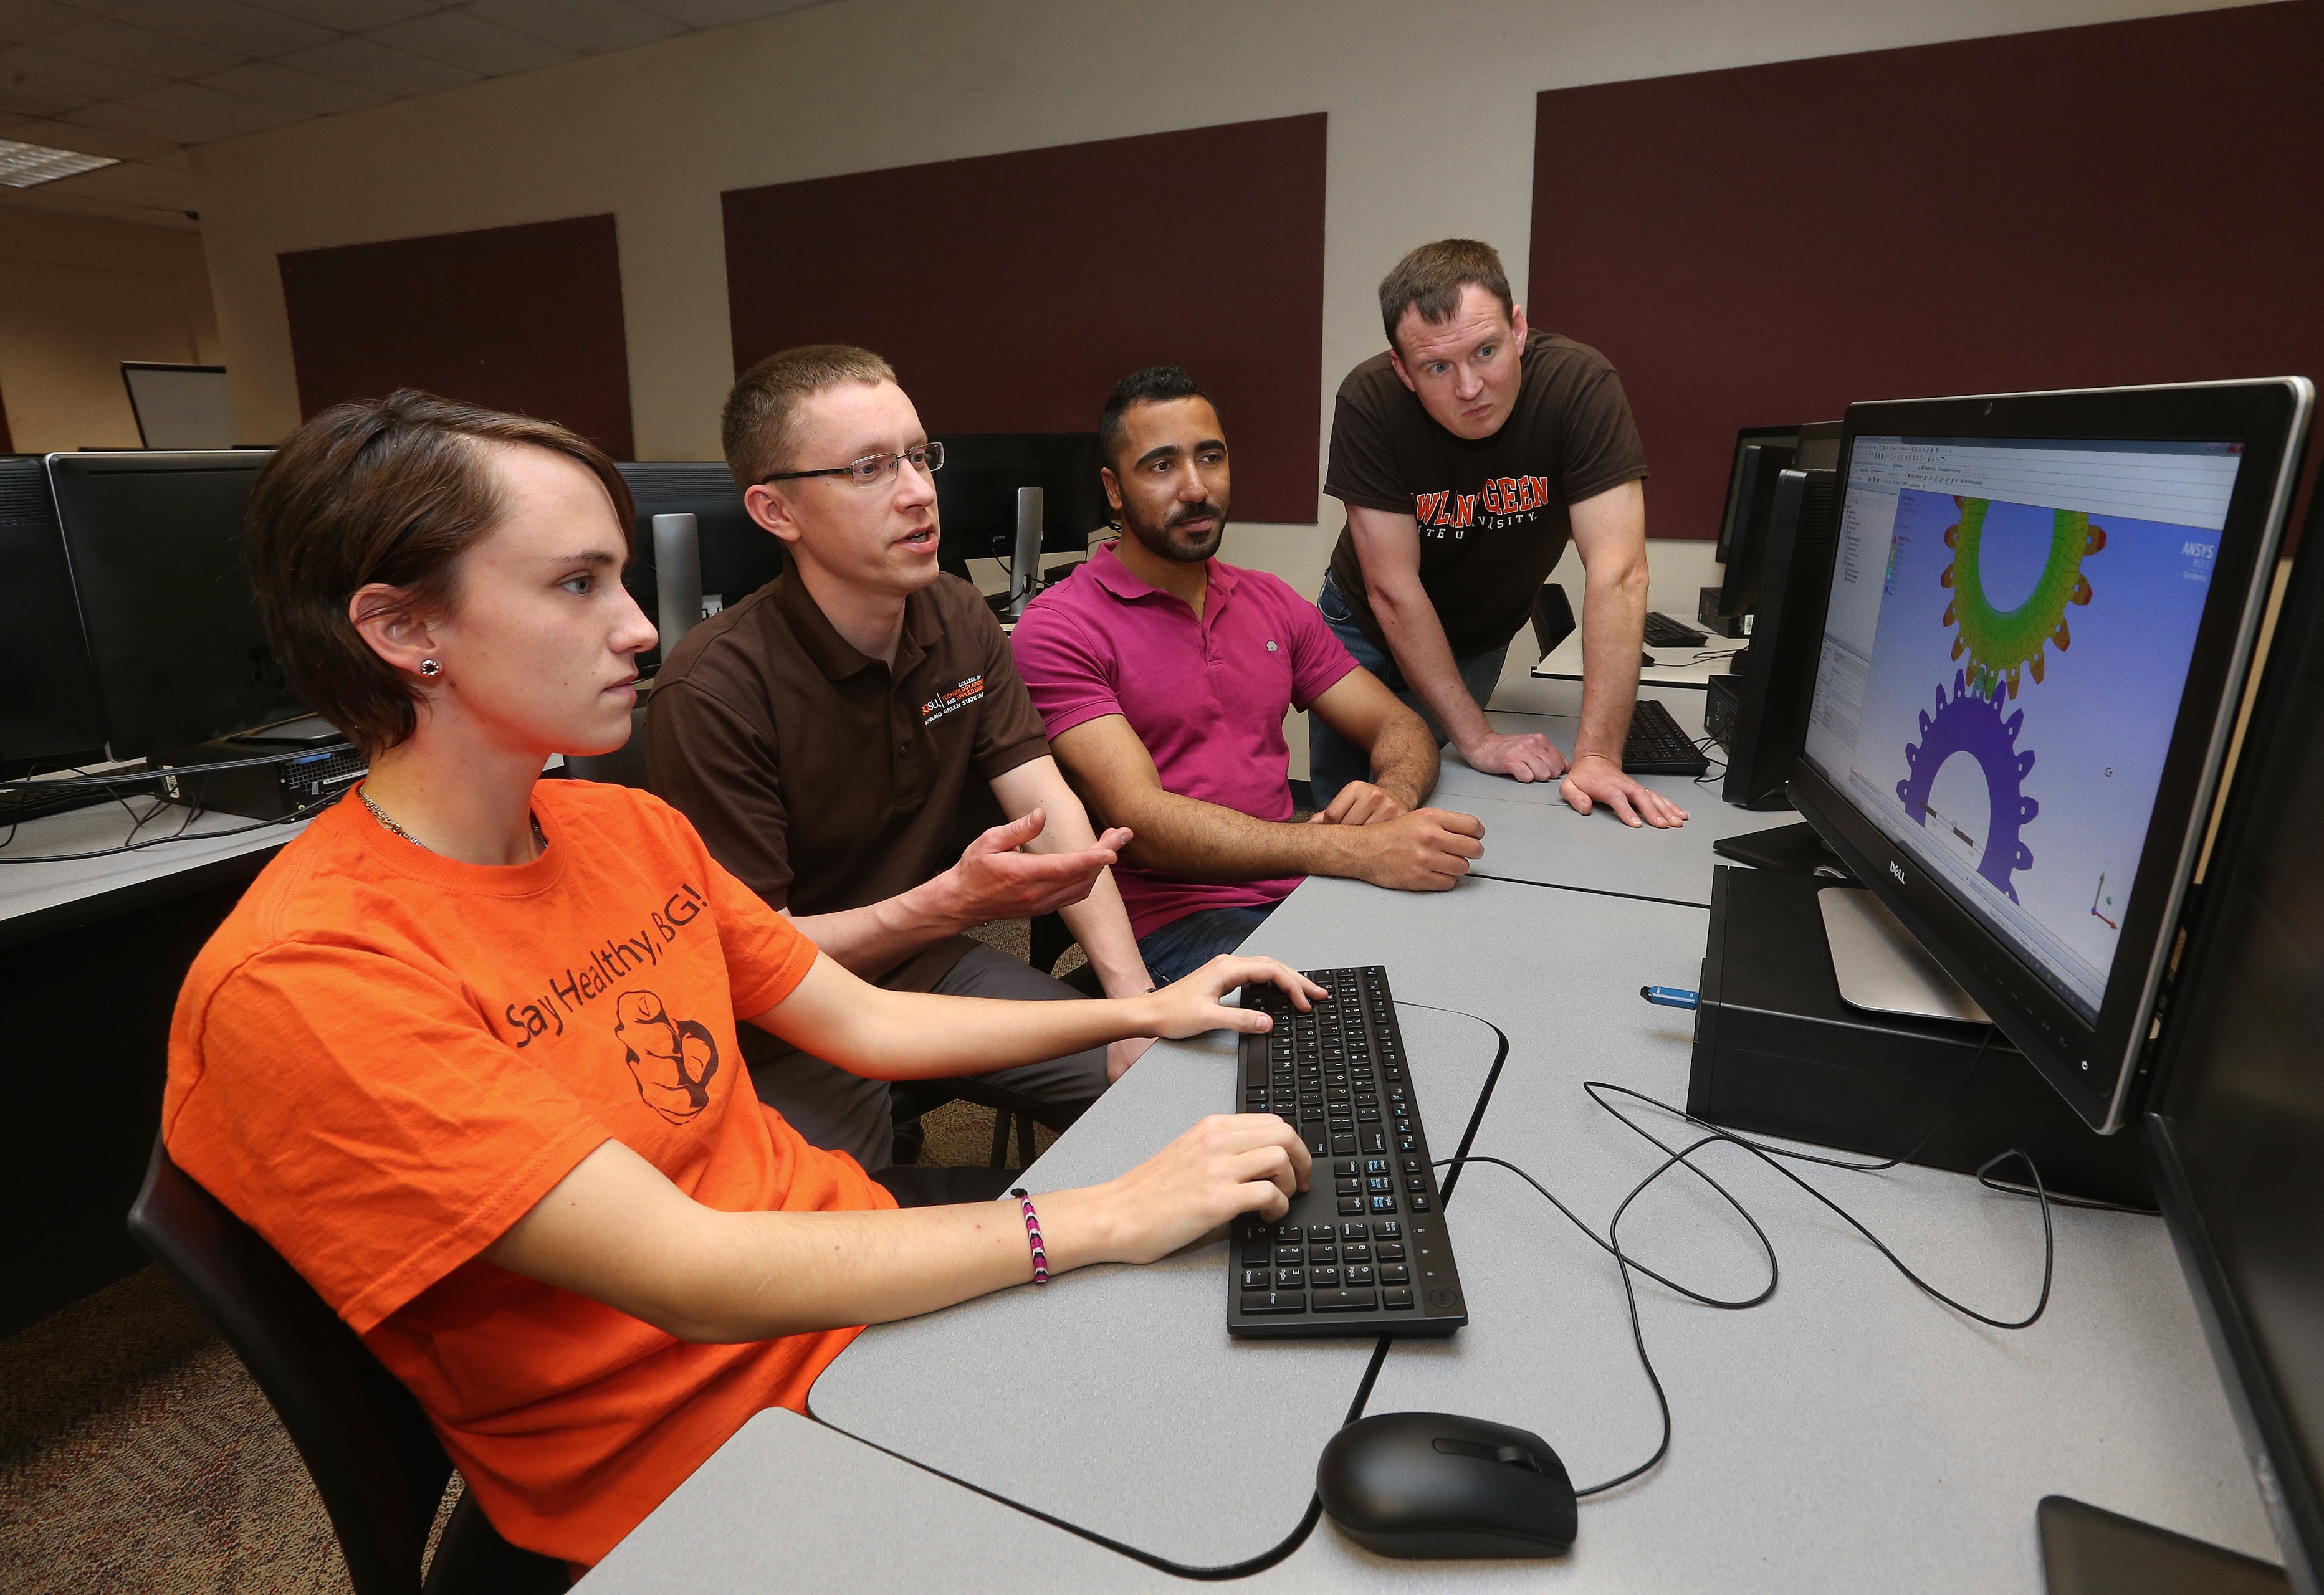 Three male and one female in the master’s program in the BGSU technology management program with a focus in quality systems work together in front of a computer.